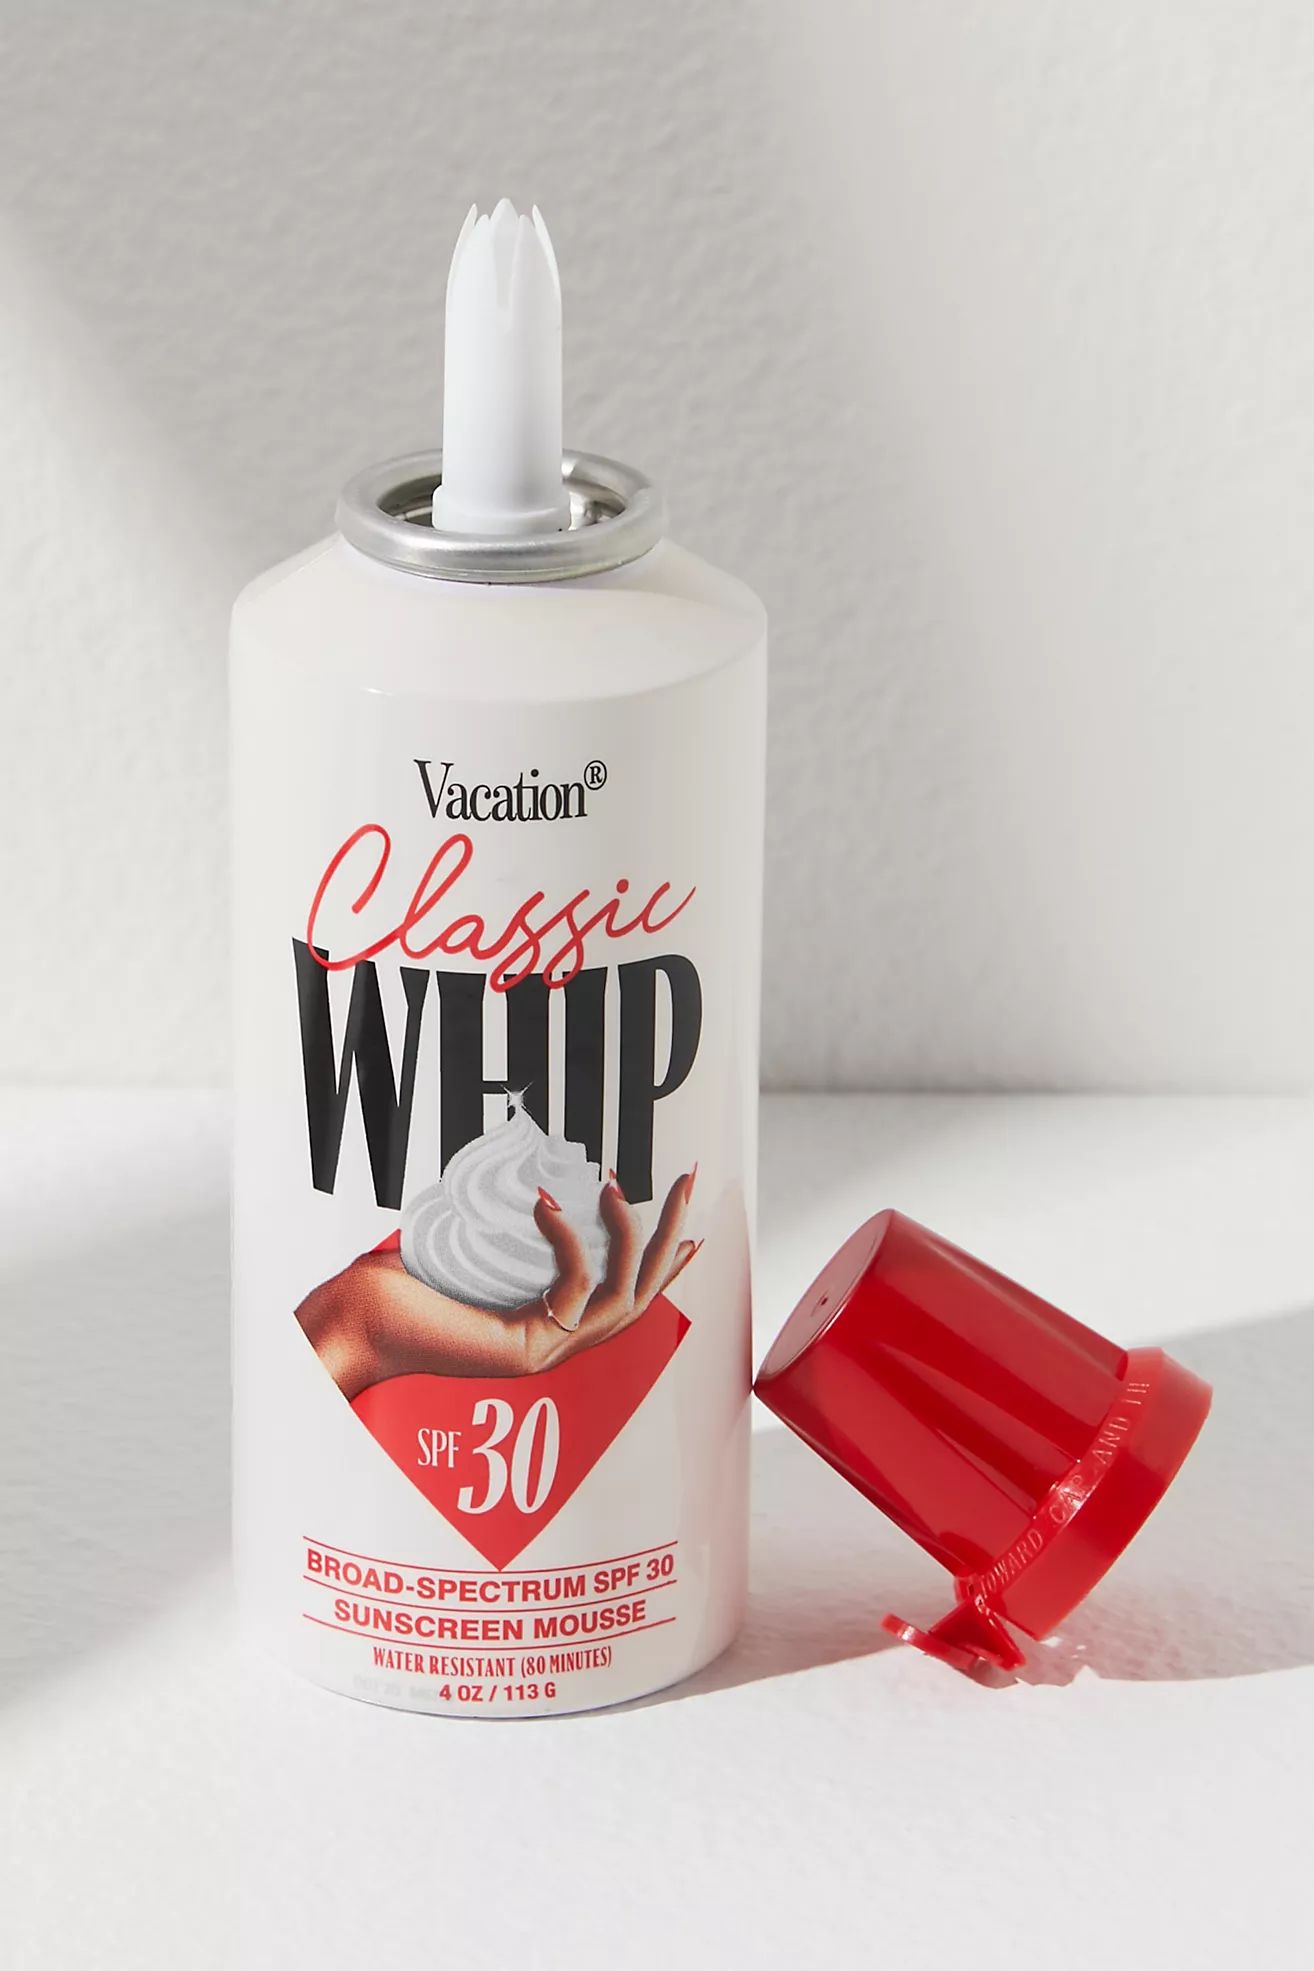 Vacation® Classic Whip Sunscreen SPF 30 | Free People (Global - UK&FR Excluded)